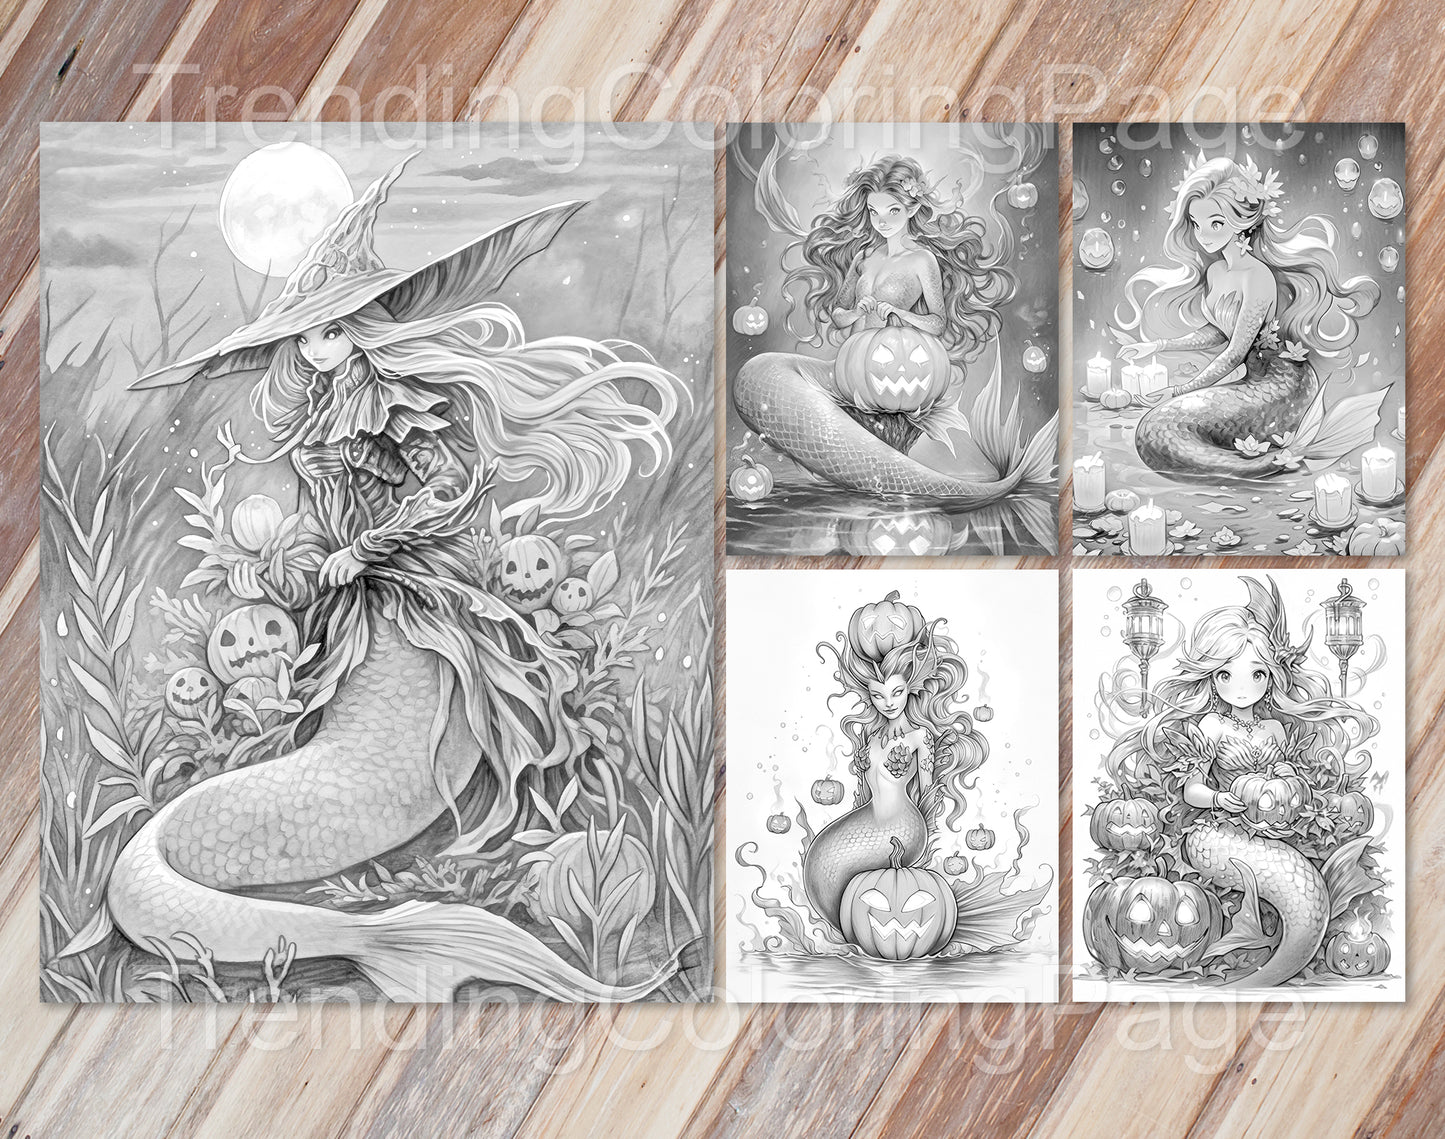 50 Halloween Mermaid Grayscale Coloring Pages - Instant Download - Printable PDF Dark/Light